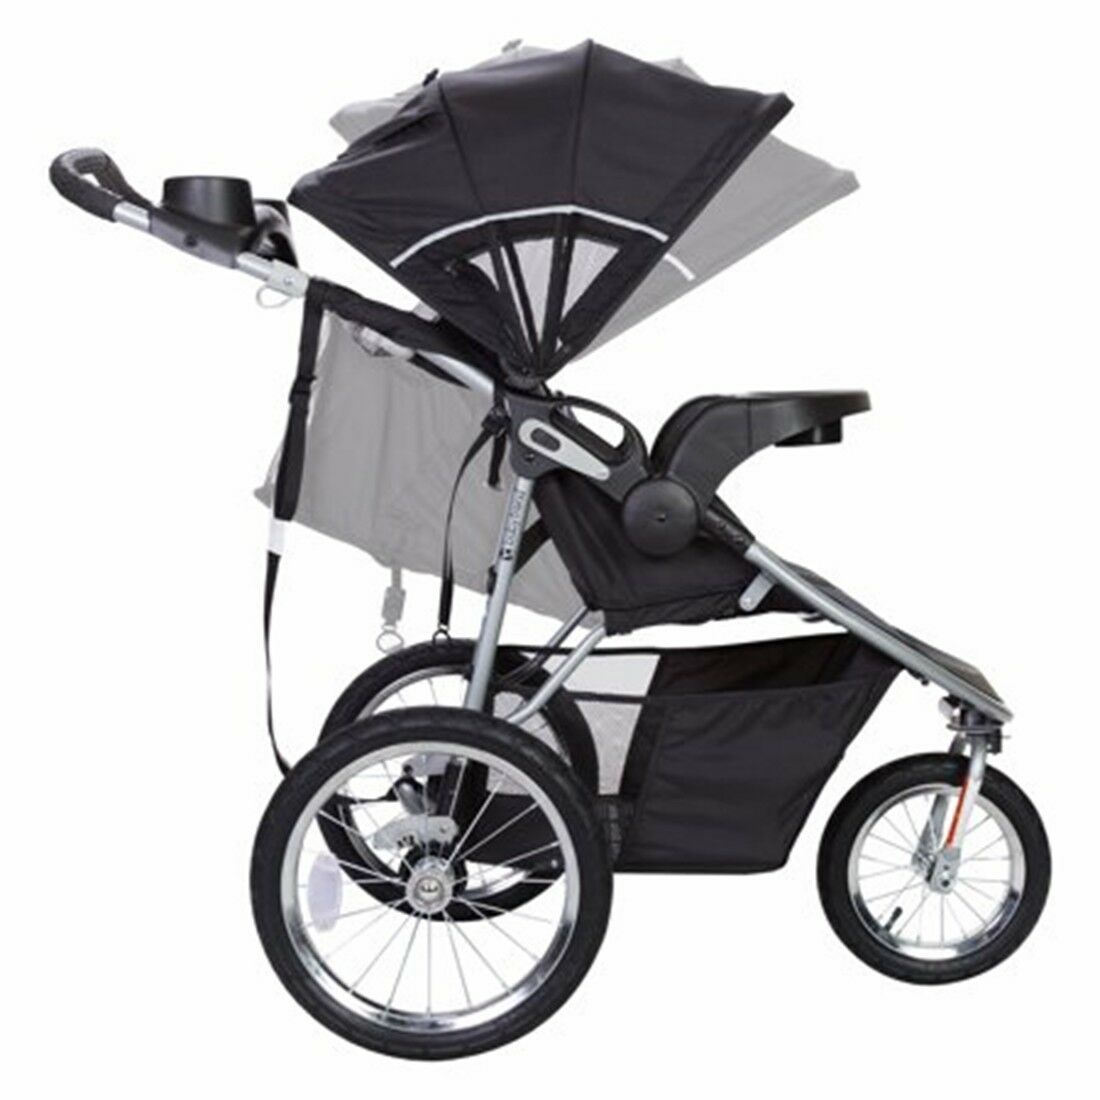 Baby Trend Stroller with Car Seat Playard BackPack Diaper Bag Travel System Set